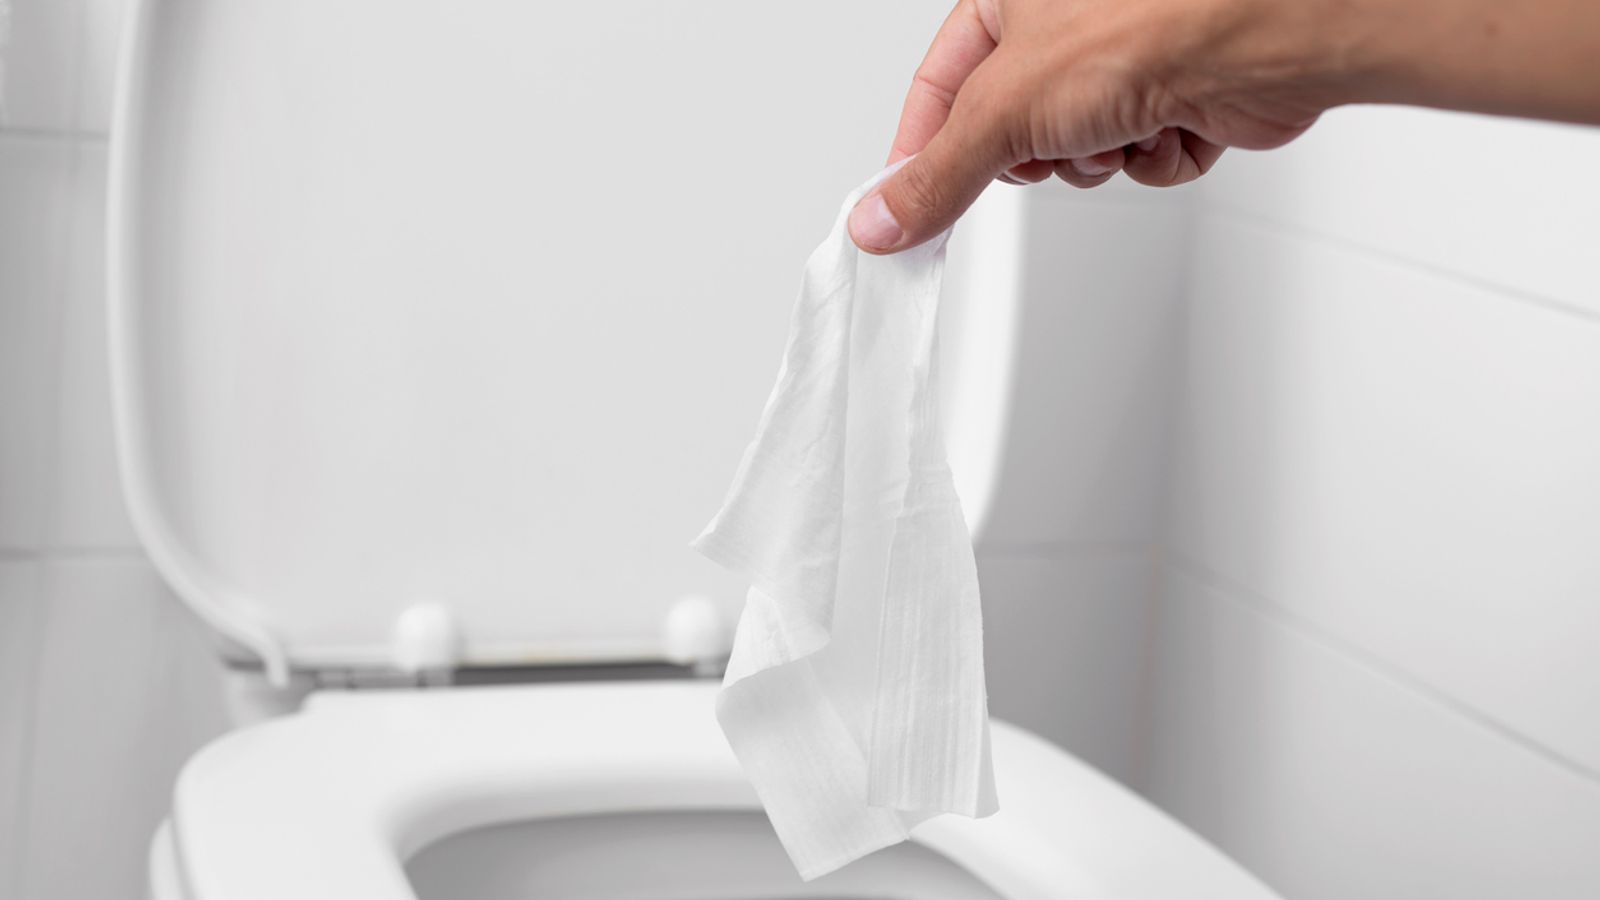 Government wet wipe ban plan criticised as rehash of previous proposal